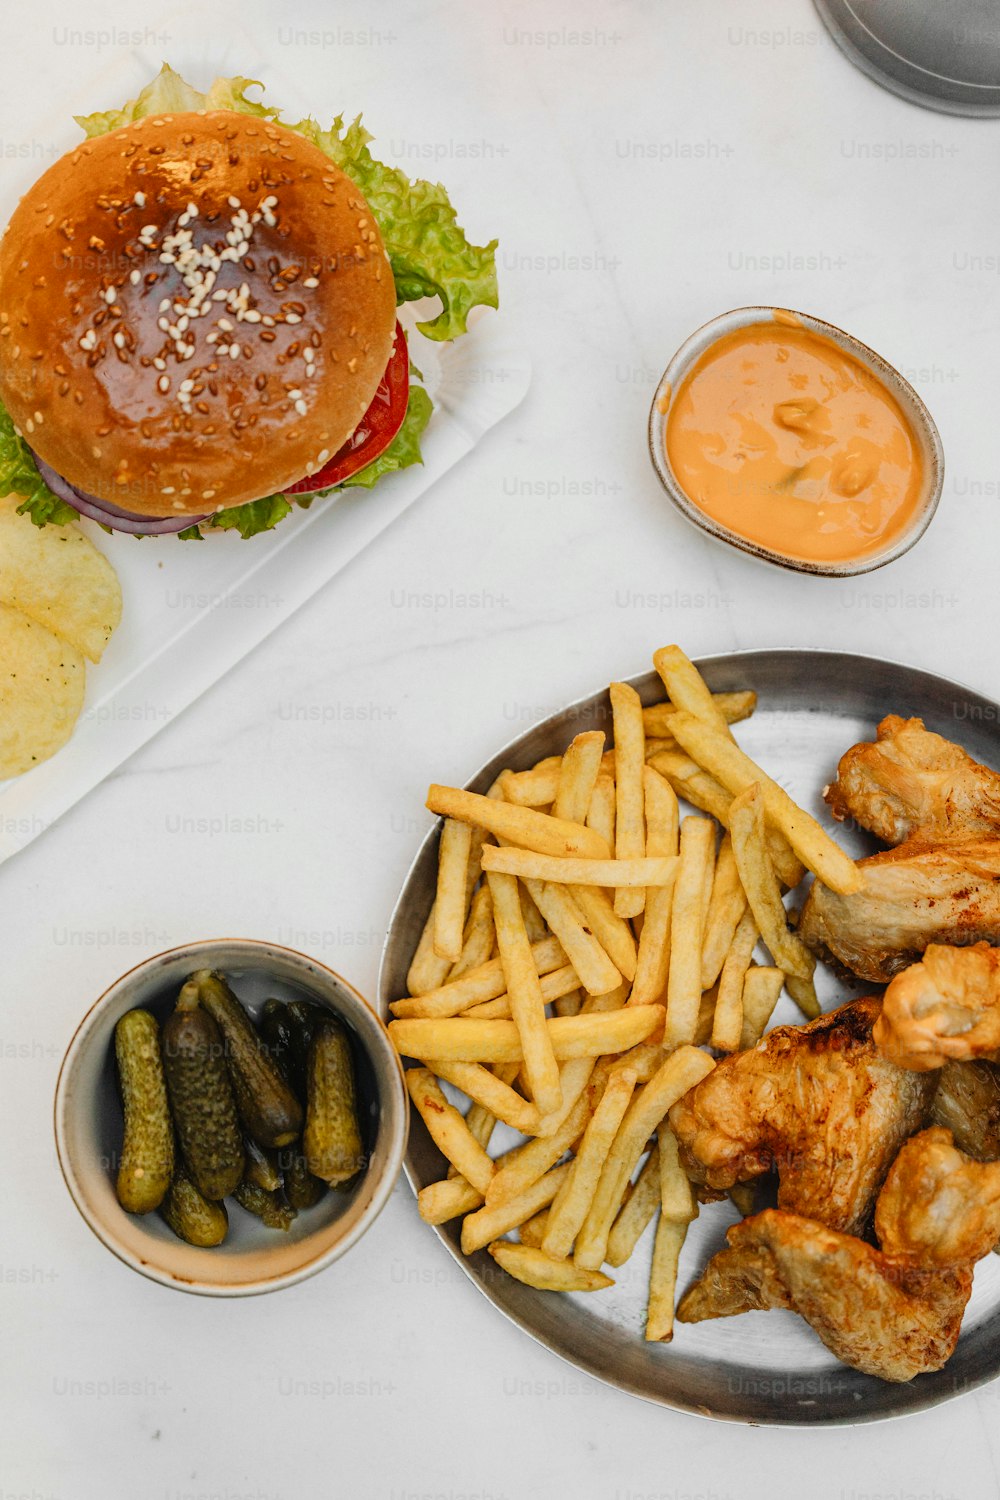 a plate of fries, pickles, and a burger on a table